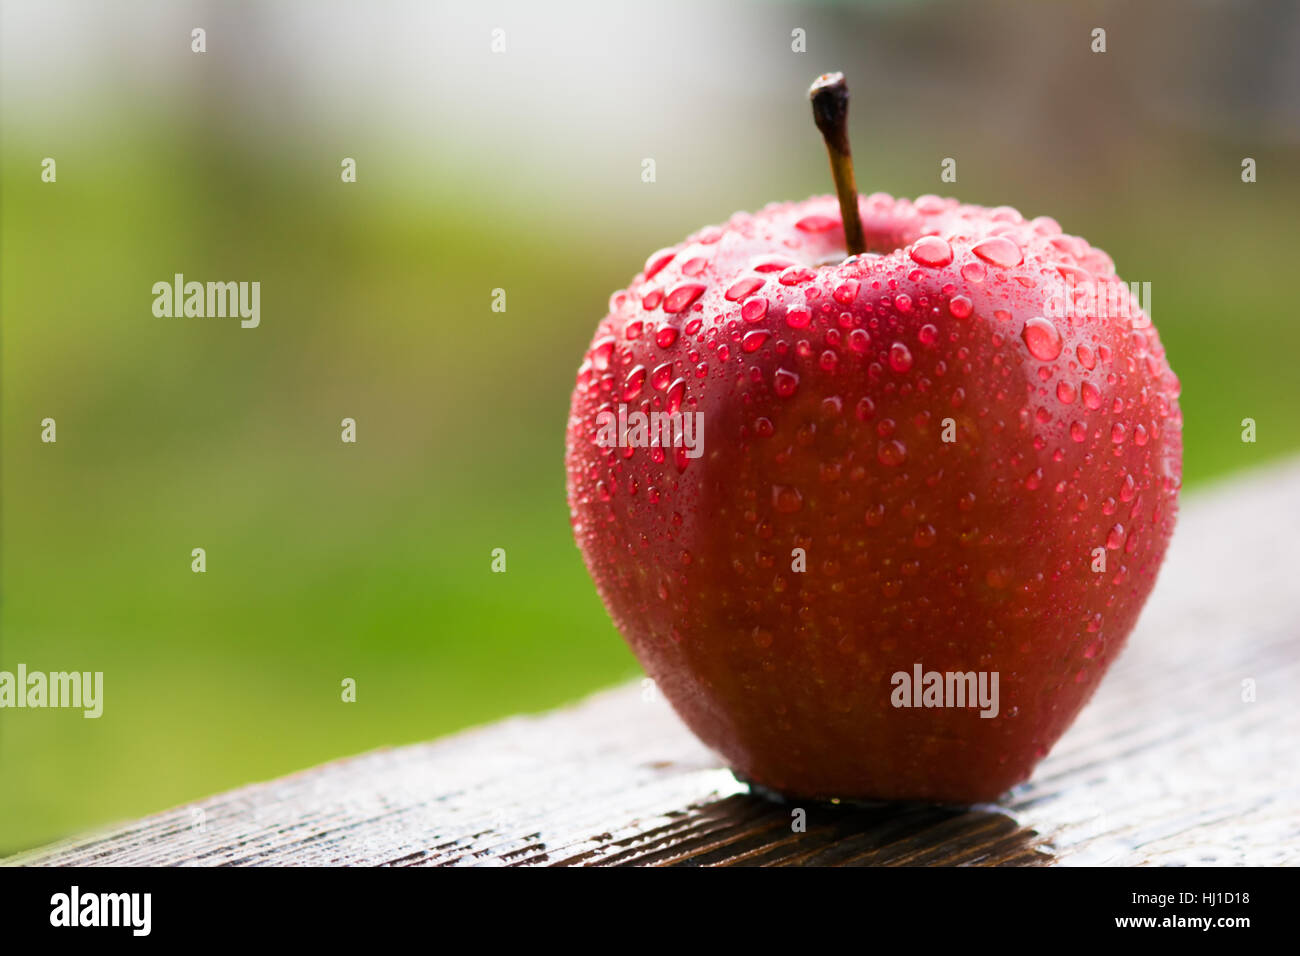 Red apple on wooden table in garden Stock Photo